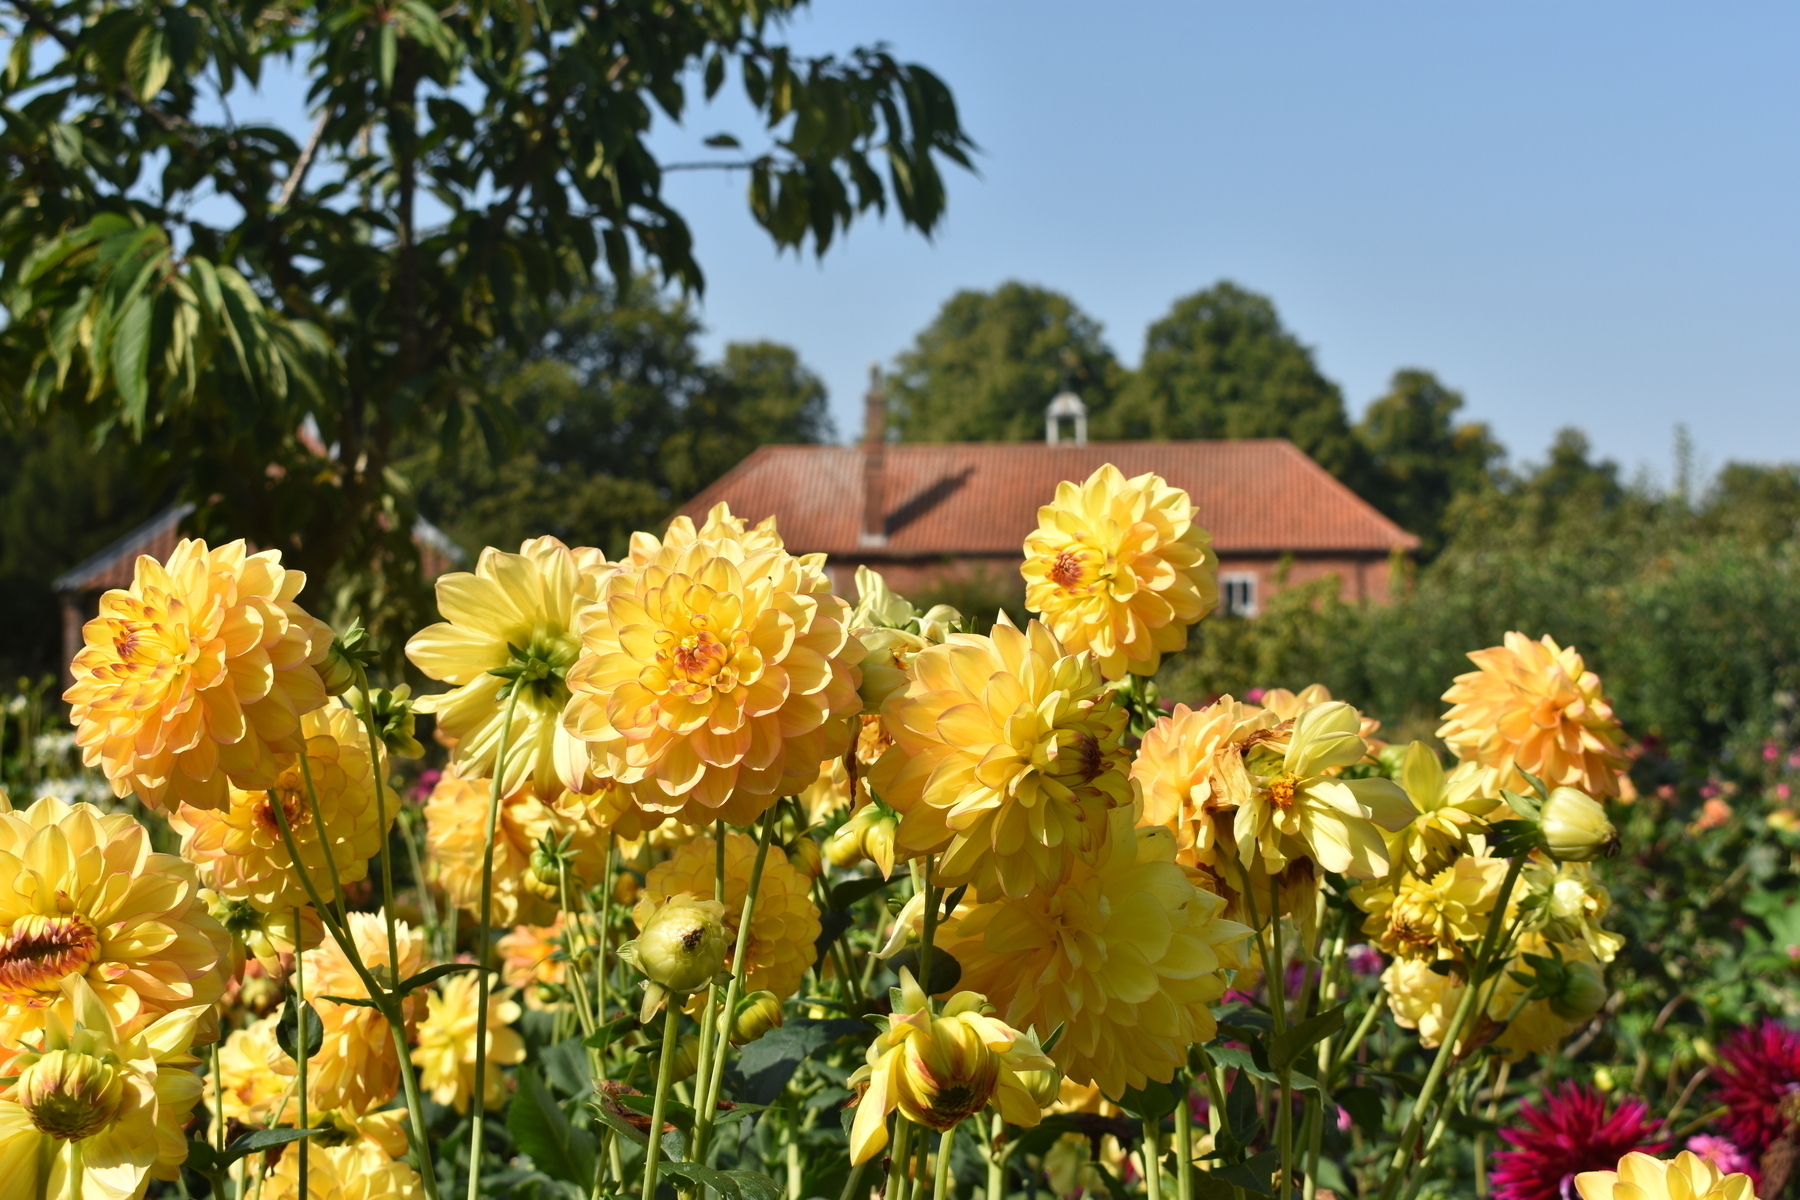 A mass of orange dahlia blooms in the foreground, in front of a red brick building which can bseen slightly out of focus in the background.